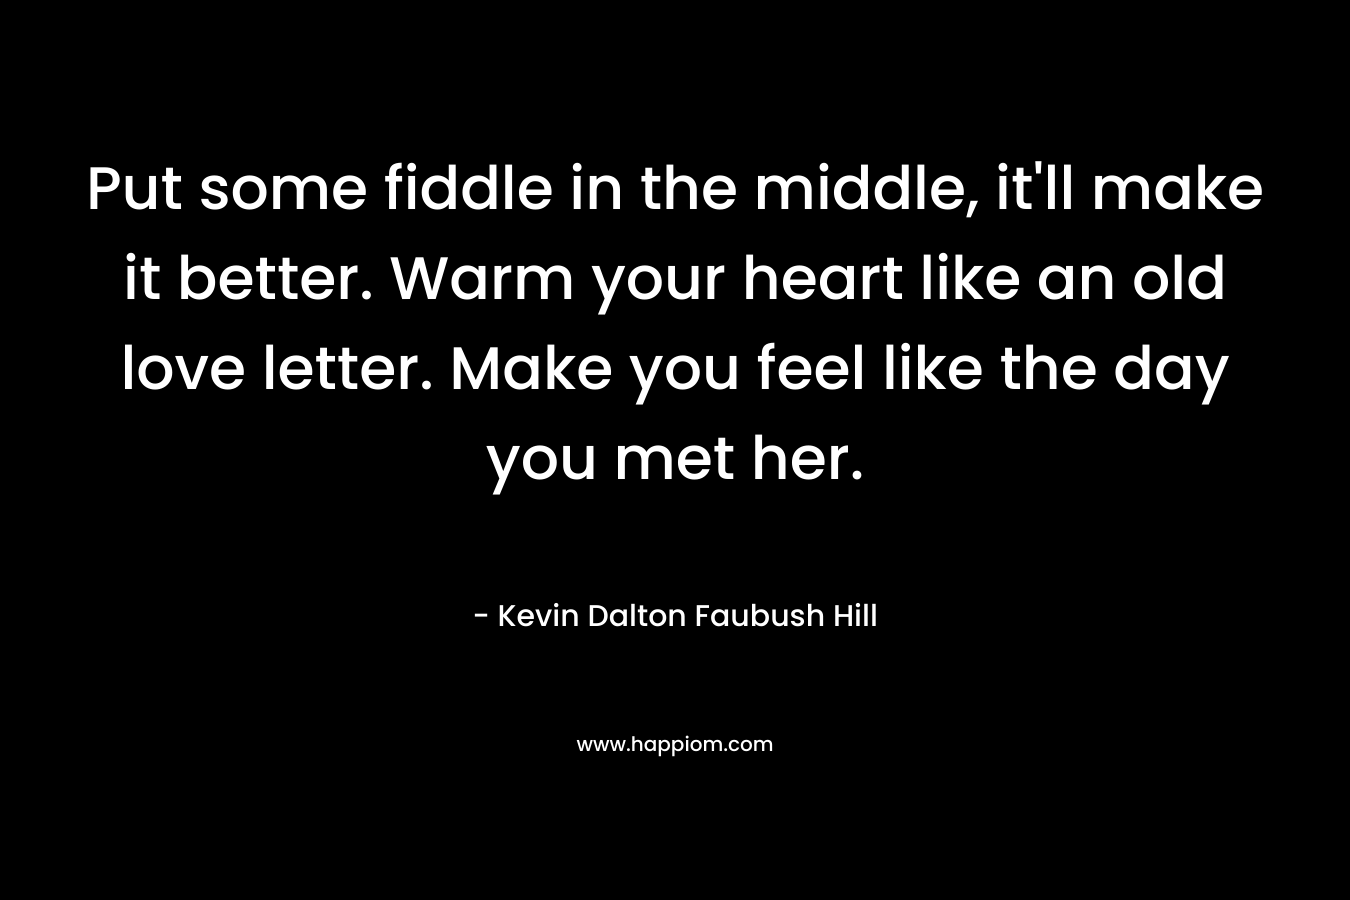 Put some fiddle in the middle, it'll make it better. Warm your heart like an old love letter. Make you feel like the day you met her.